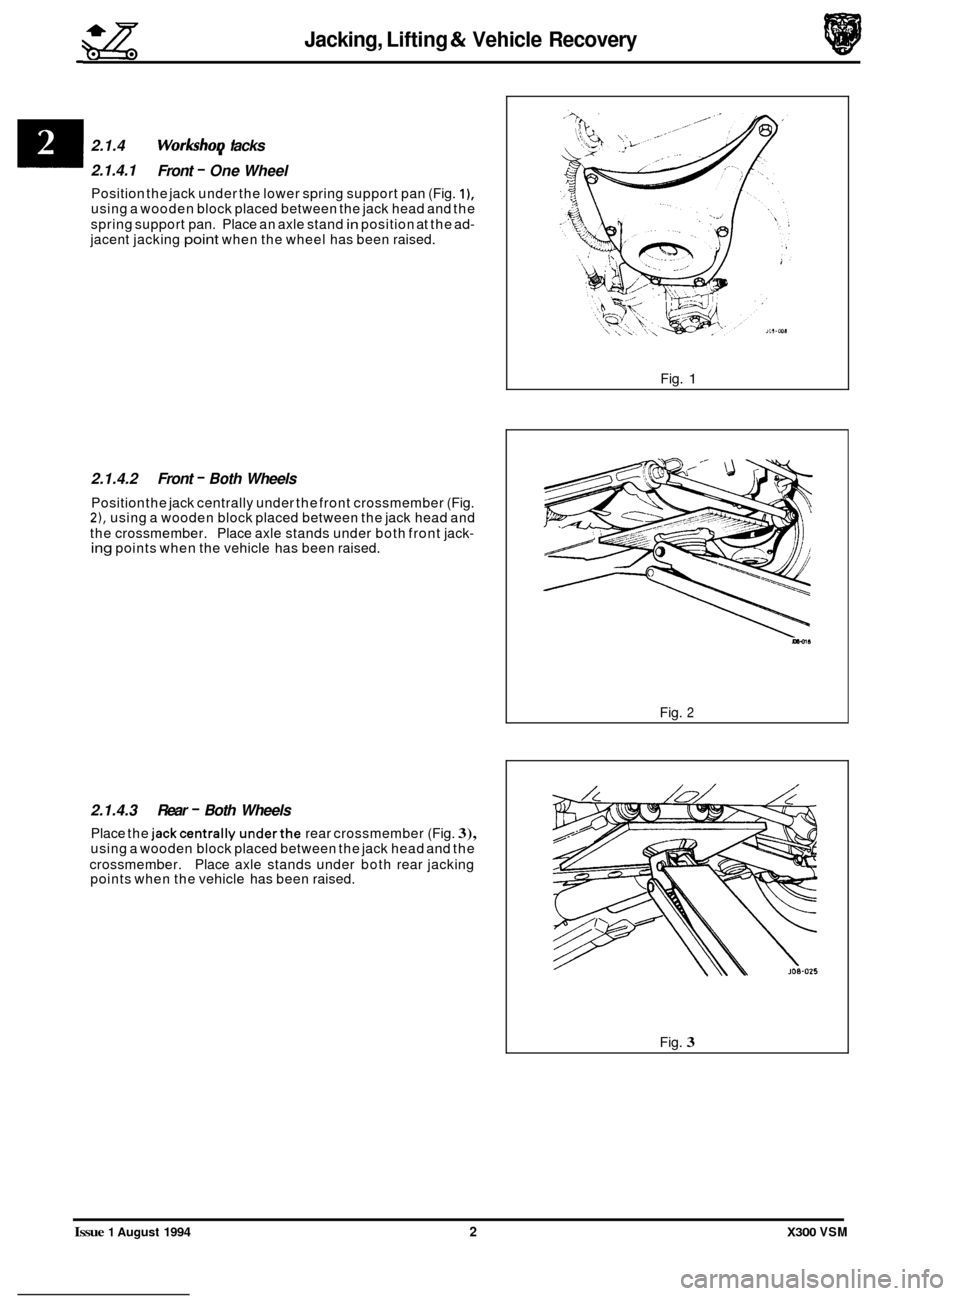 JAGUAR XJ6 1994 2.G Owners Guide gg Jacking, Lifting & Vehicle Recovery 
.- 
- 2.1.4.1 
Front - One Wheel 
Position  the jack  under  the lower  spring  support  pan (Fig. I), using  a wooden  block placed  between  the jack  head an